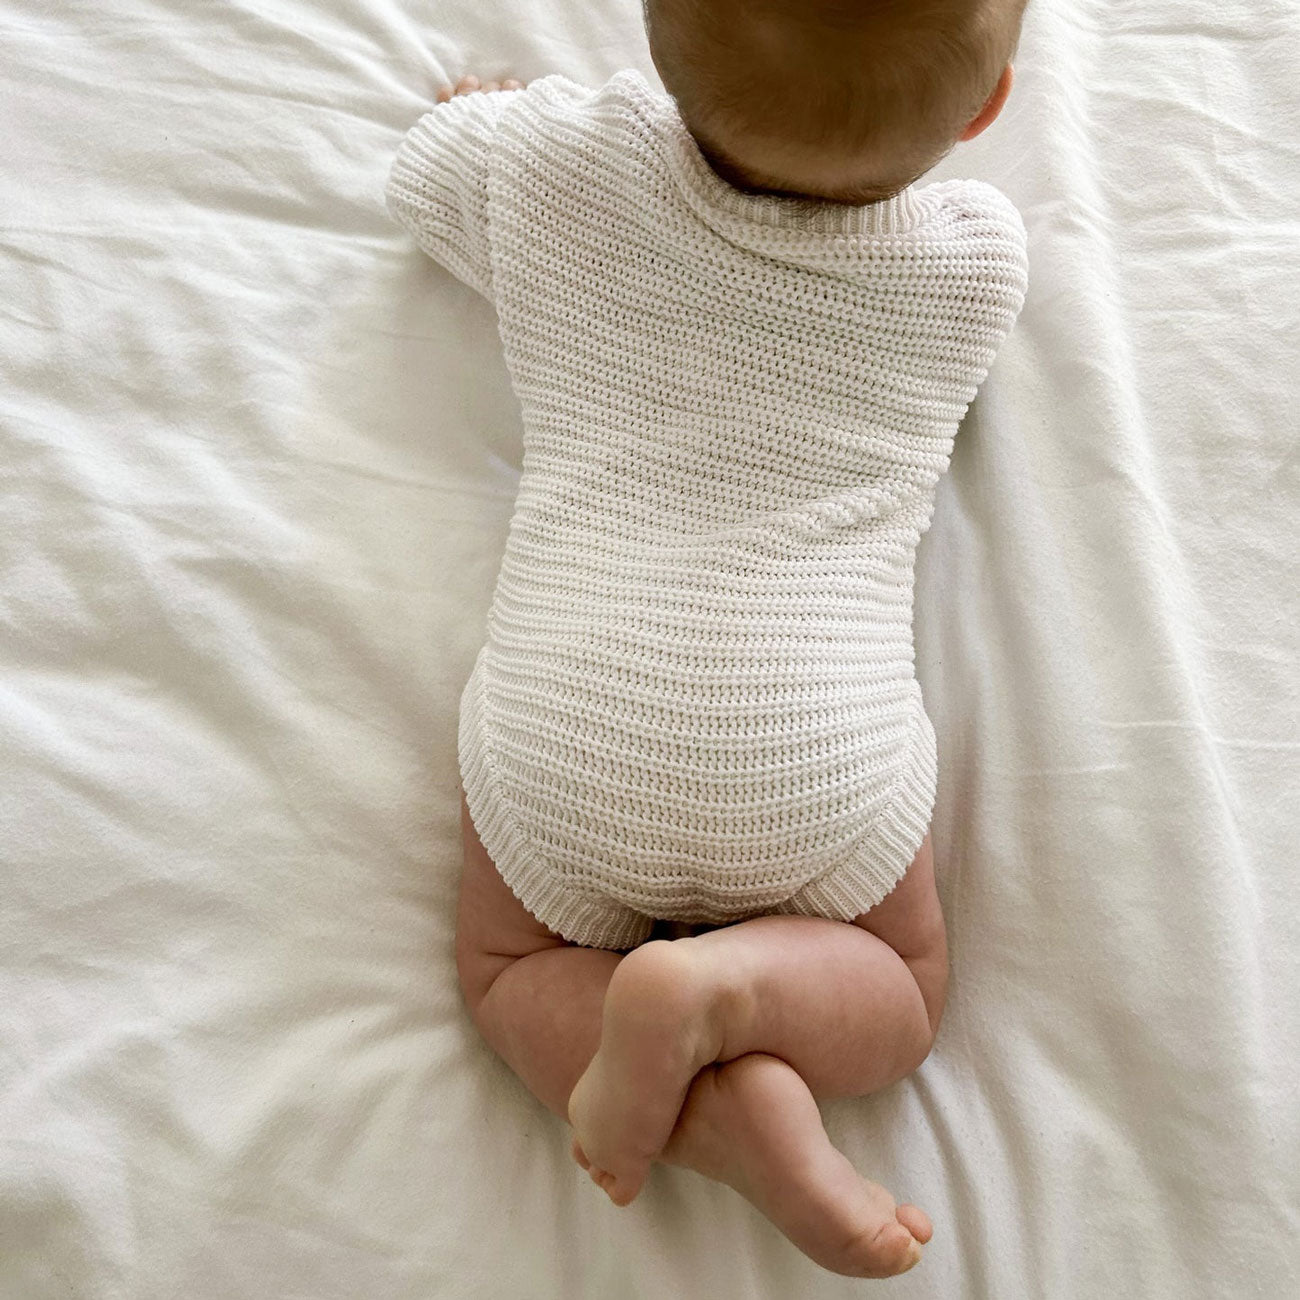 Baby wearing Oat and Co Chunky Knit Onesie - Dove